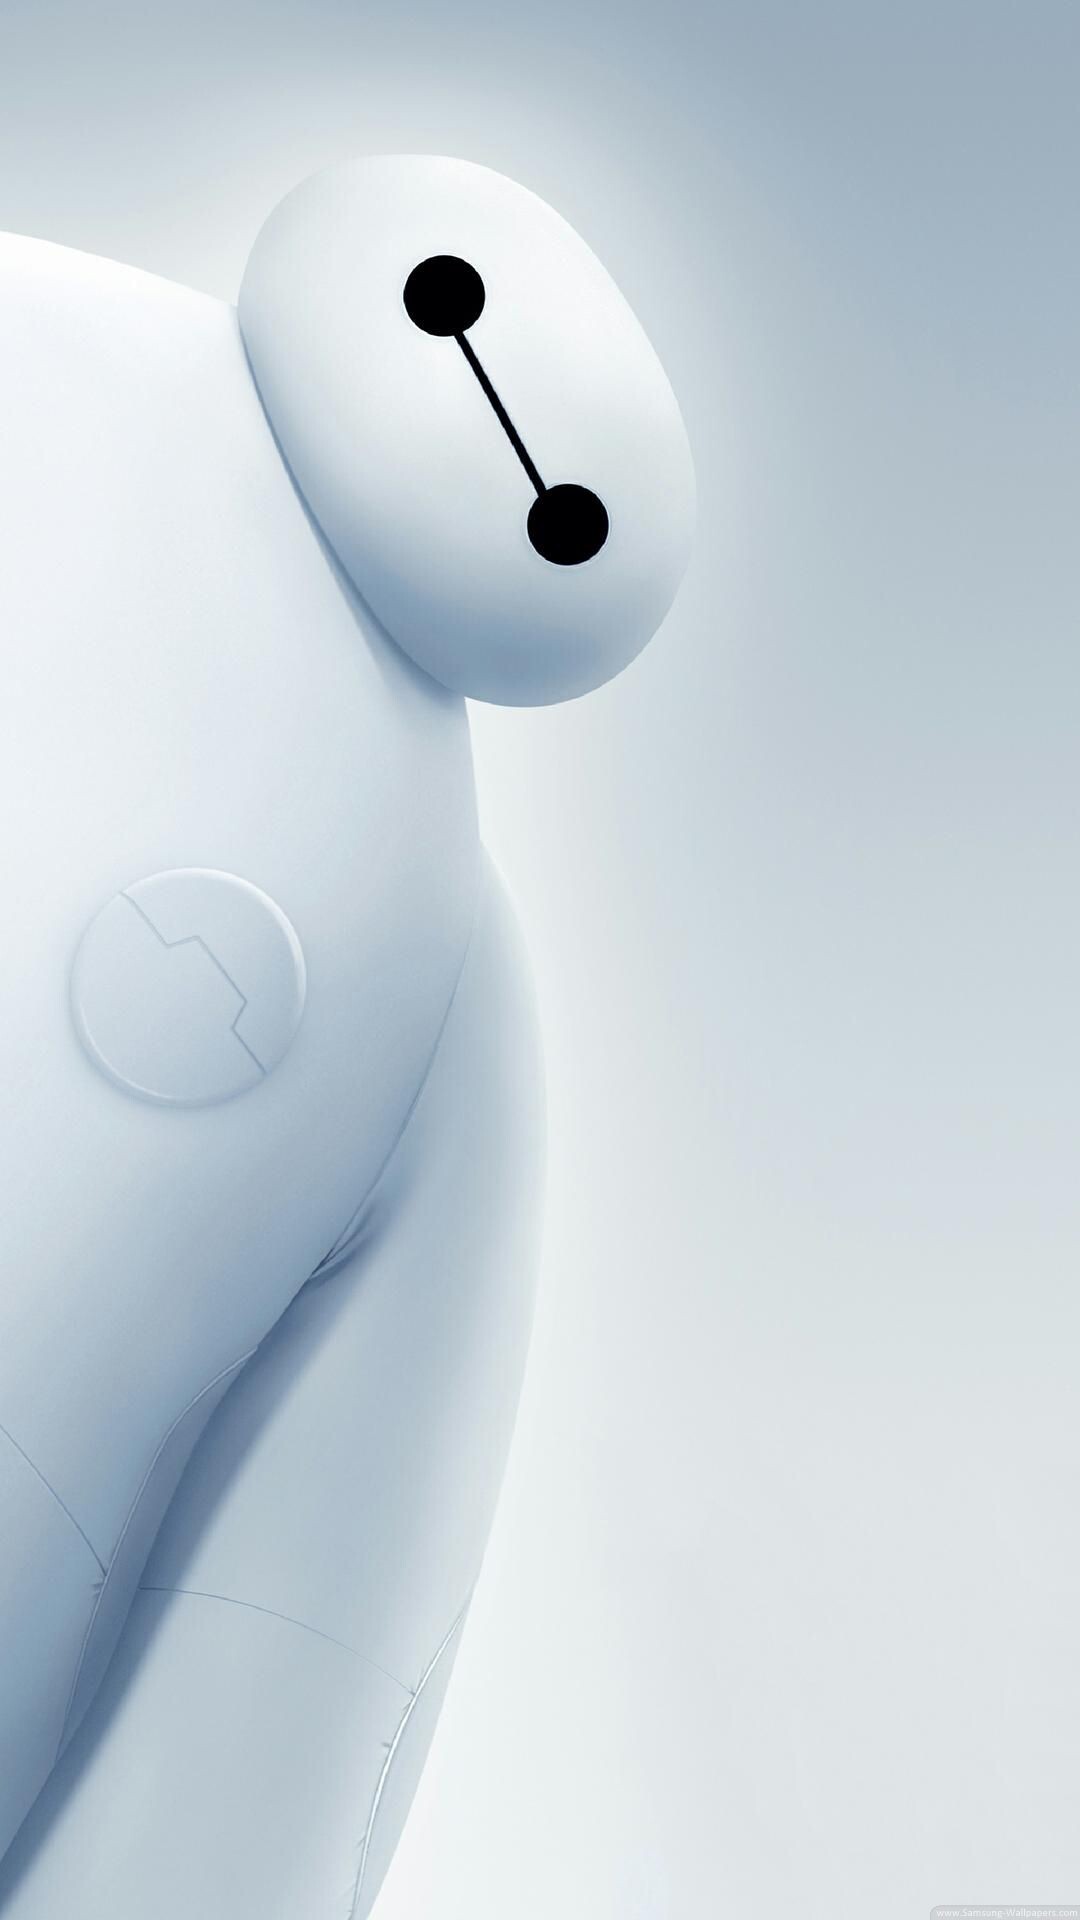 Baymax! (TV Series): A spinoff of the animated feature film Big Hero 6, A robot created by Tadashi, Hiro’s brother. 1080x1920 Full HD Wallpaper.